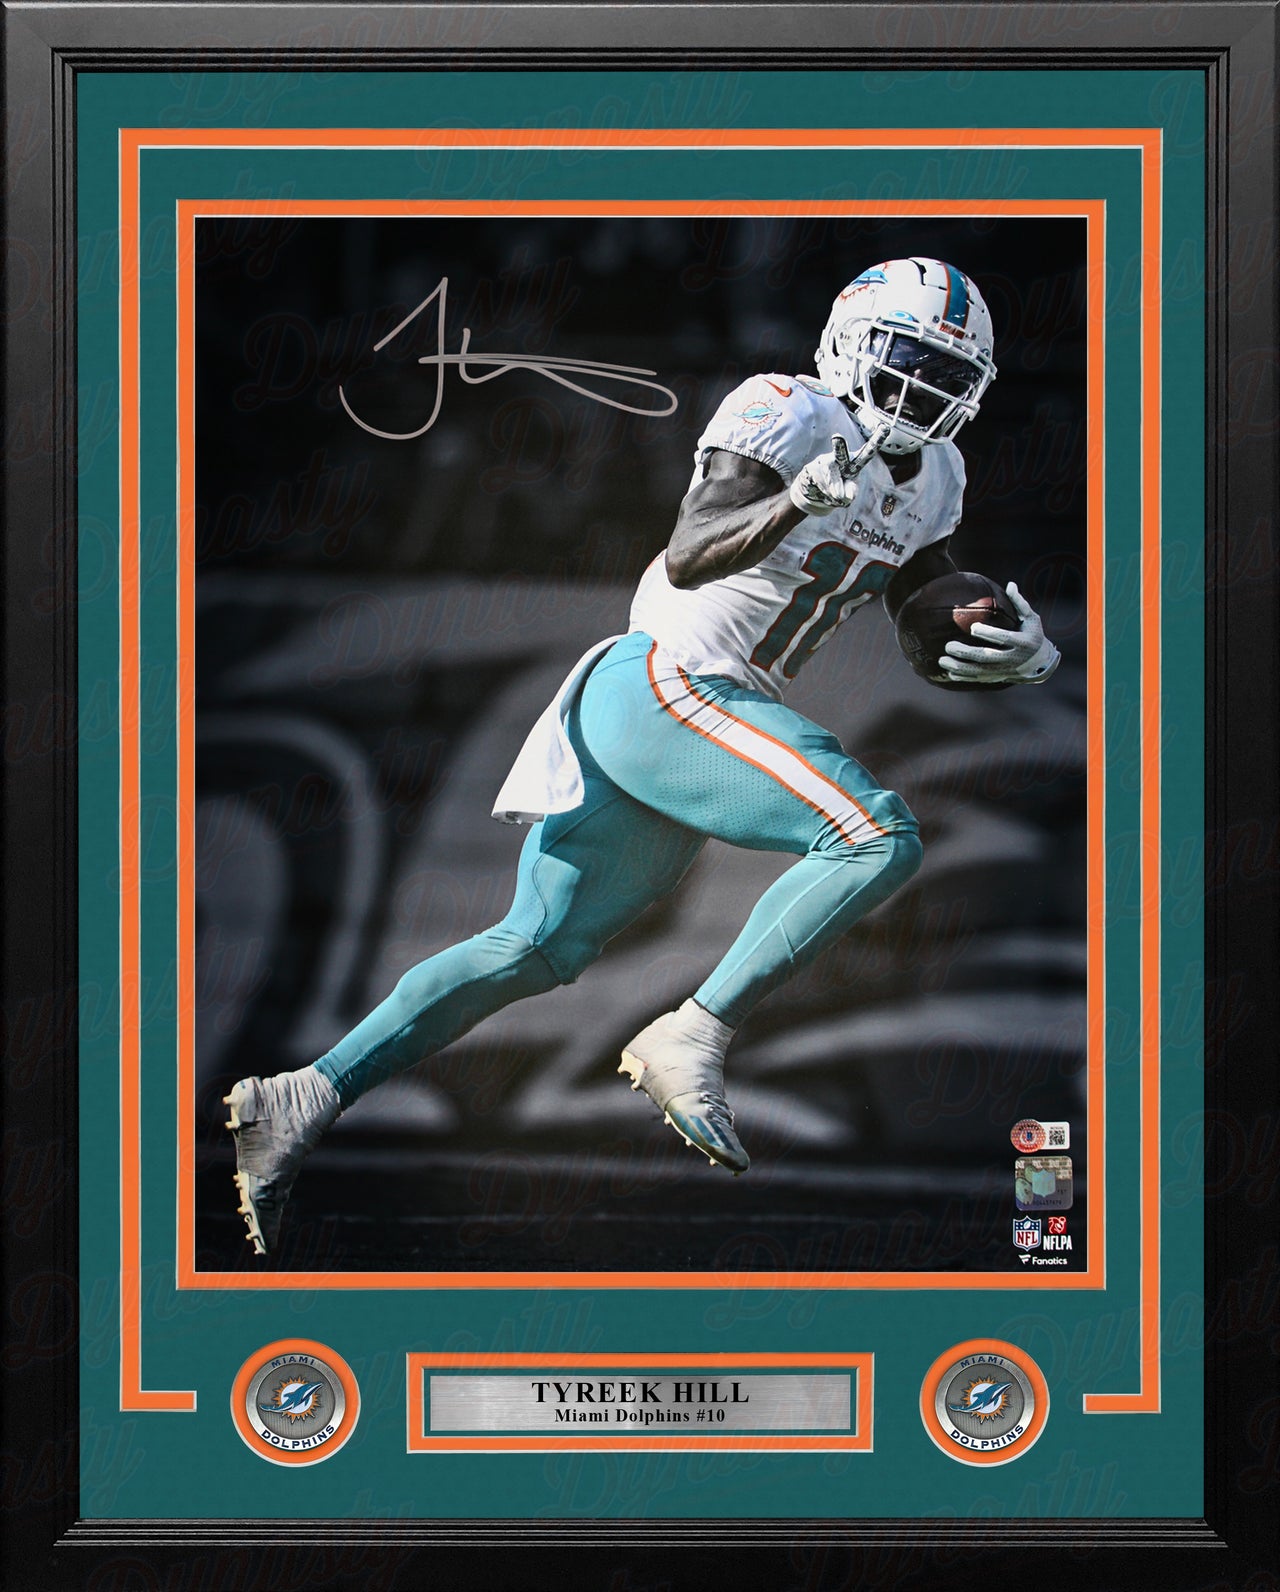 Tyreek Hill in Action Miami Dolphins Autographed Framed Football Photo - Dynasty Sports & Framing 